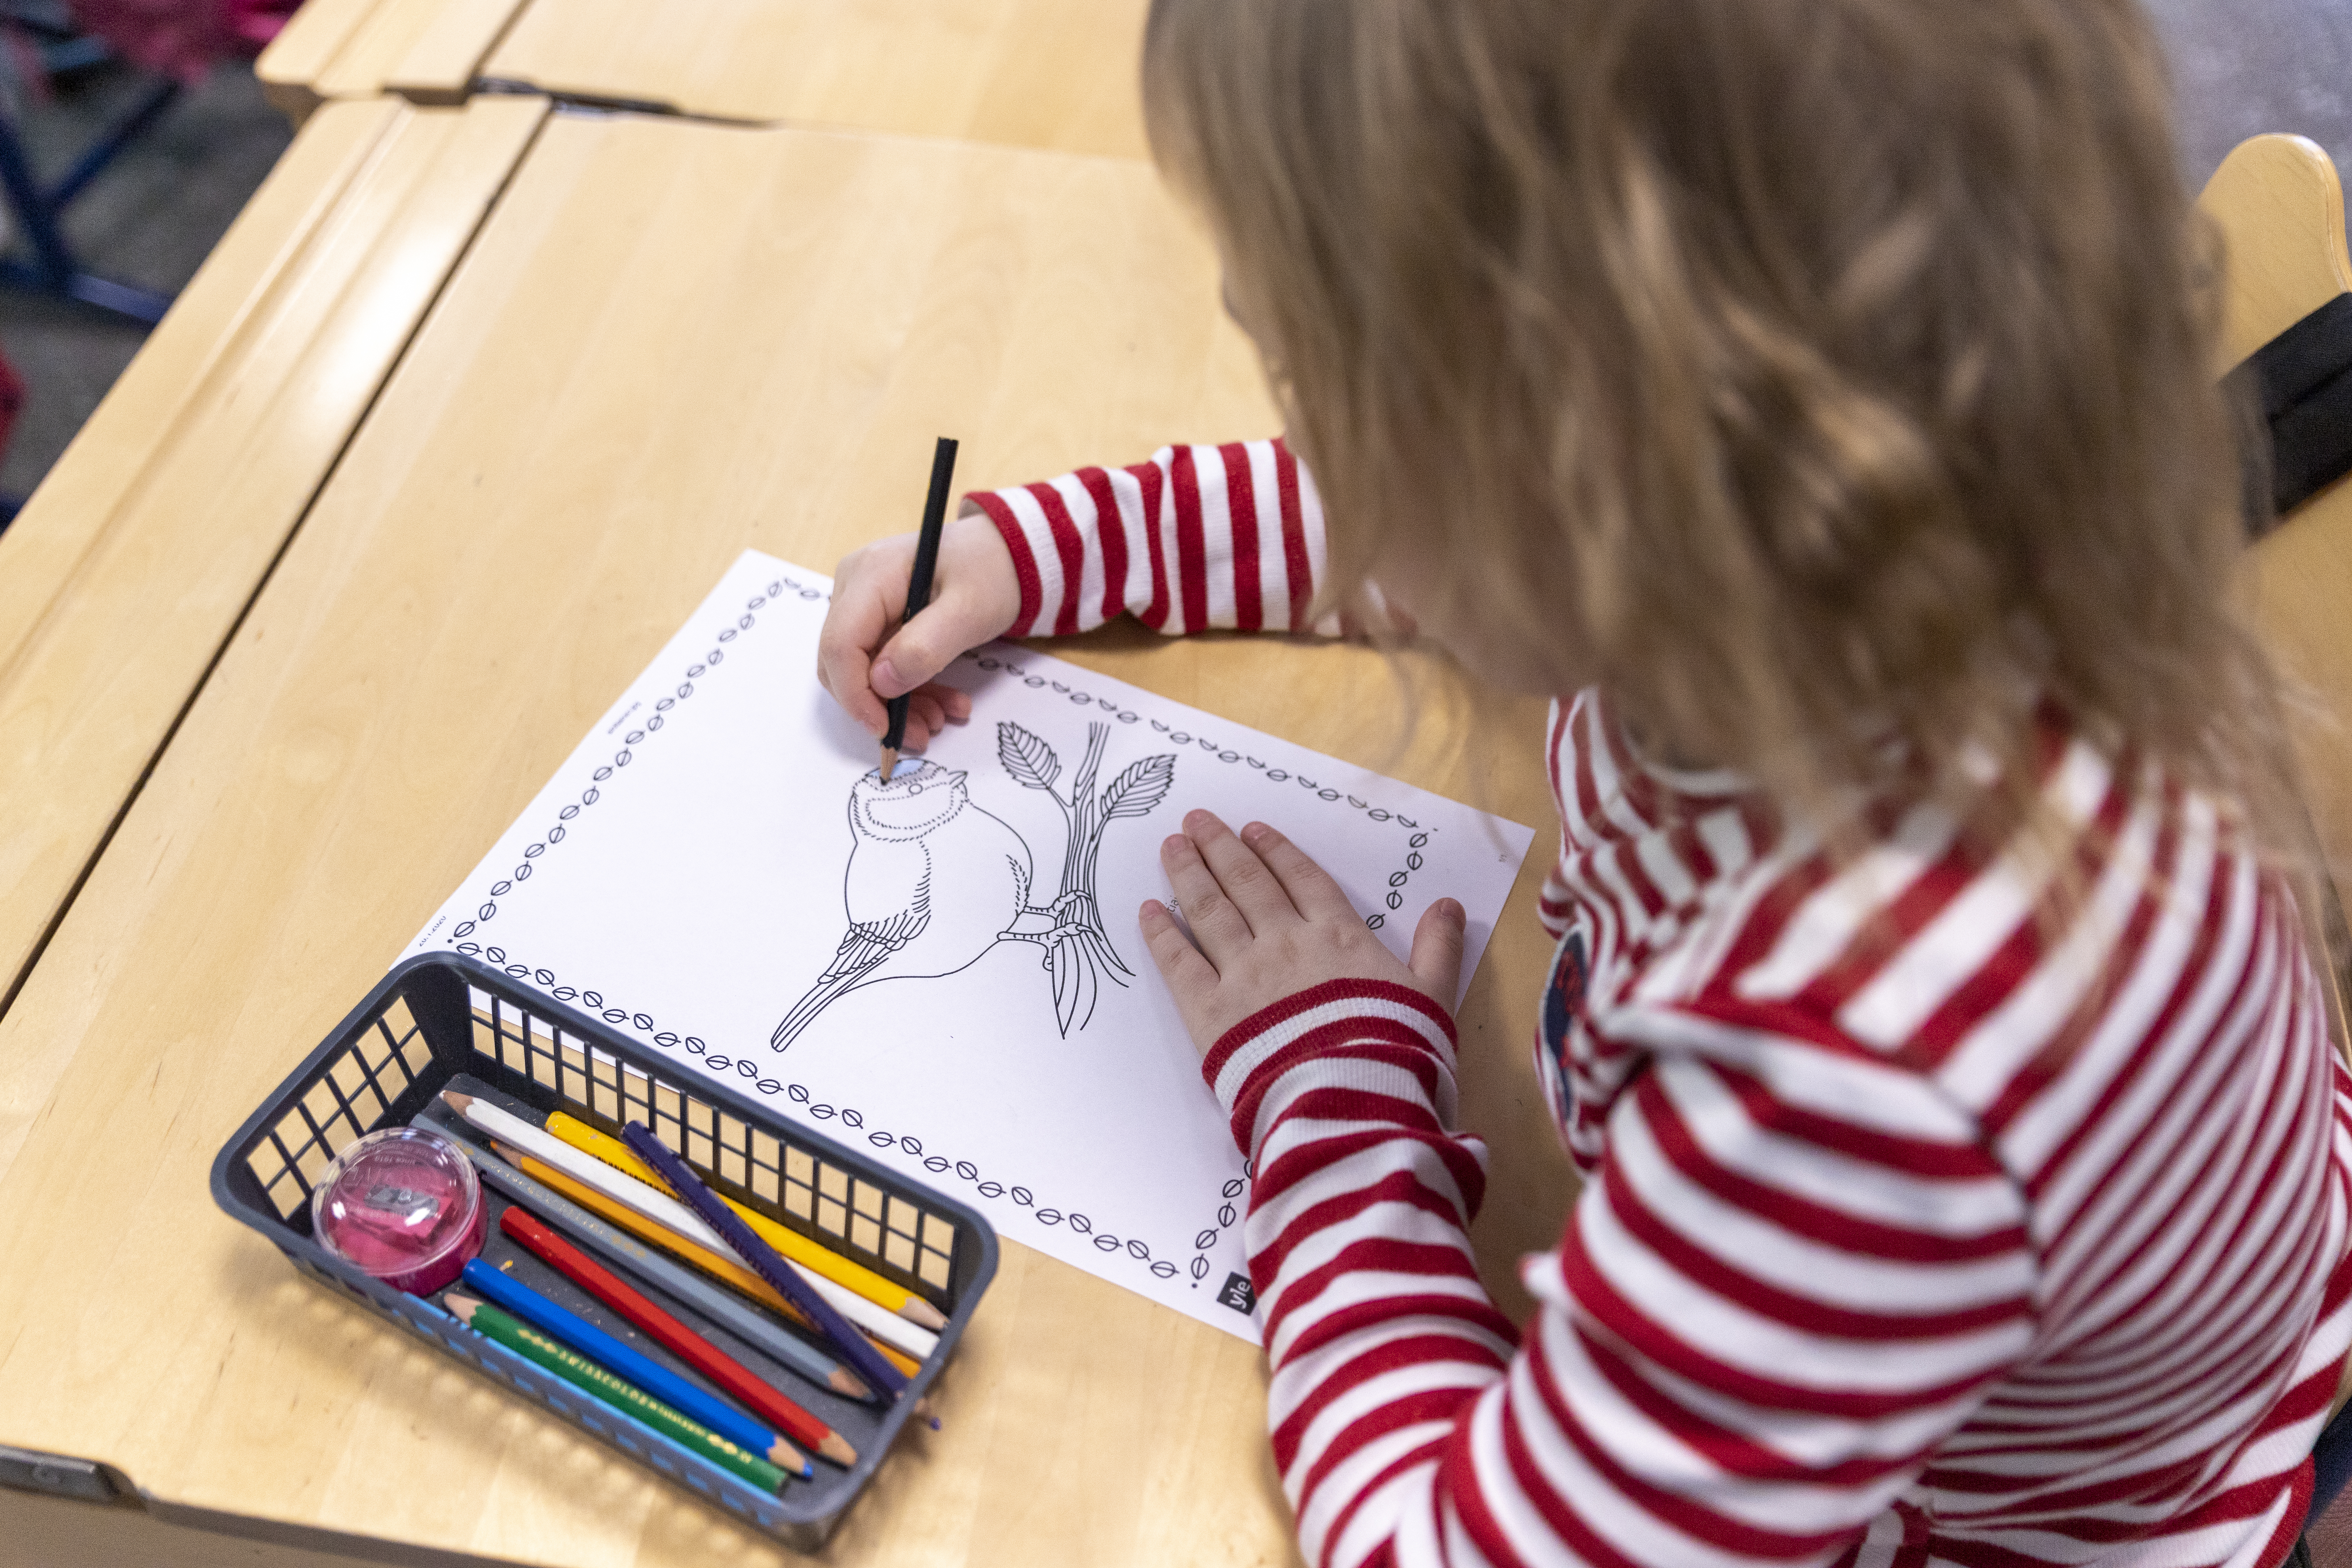 Finland starts a two-year pre-school exam